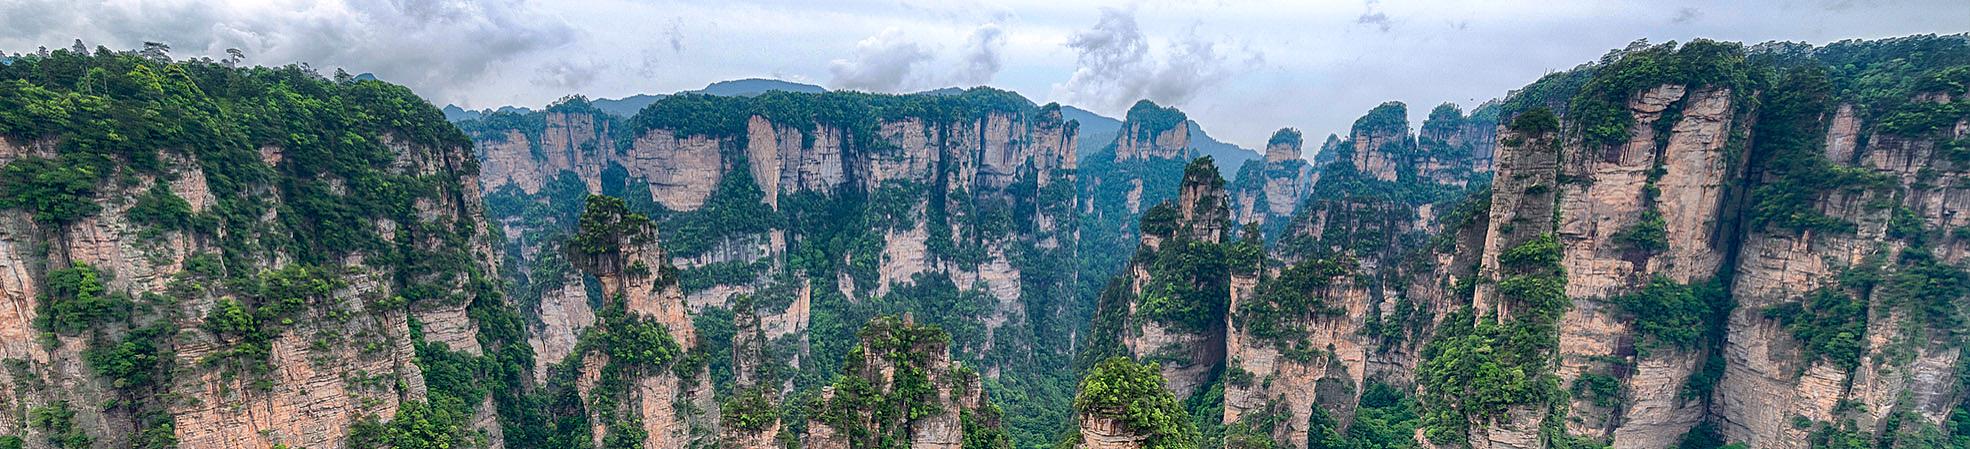 Best of Scenic China: 7 Mountains Worth Visiting